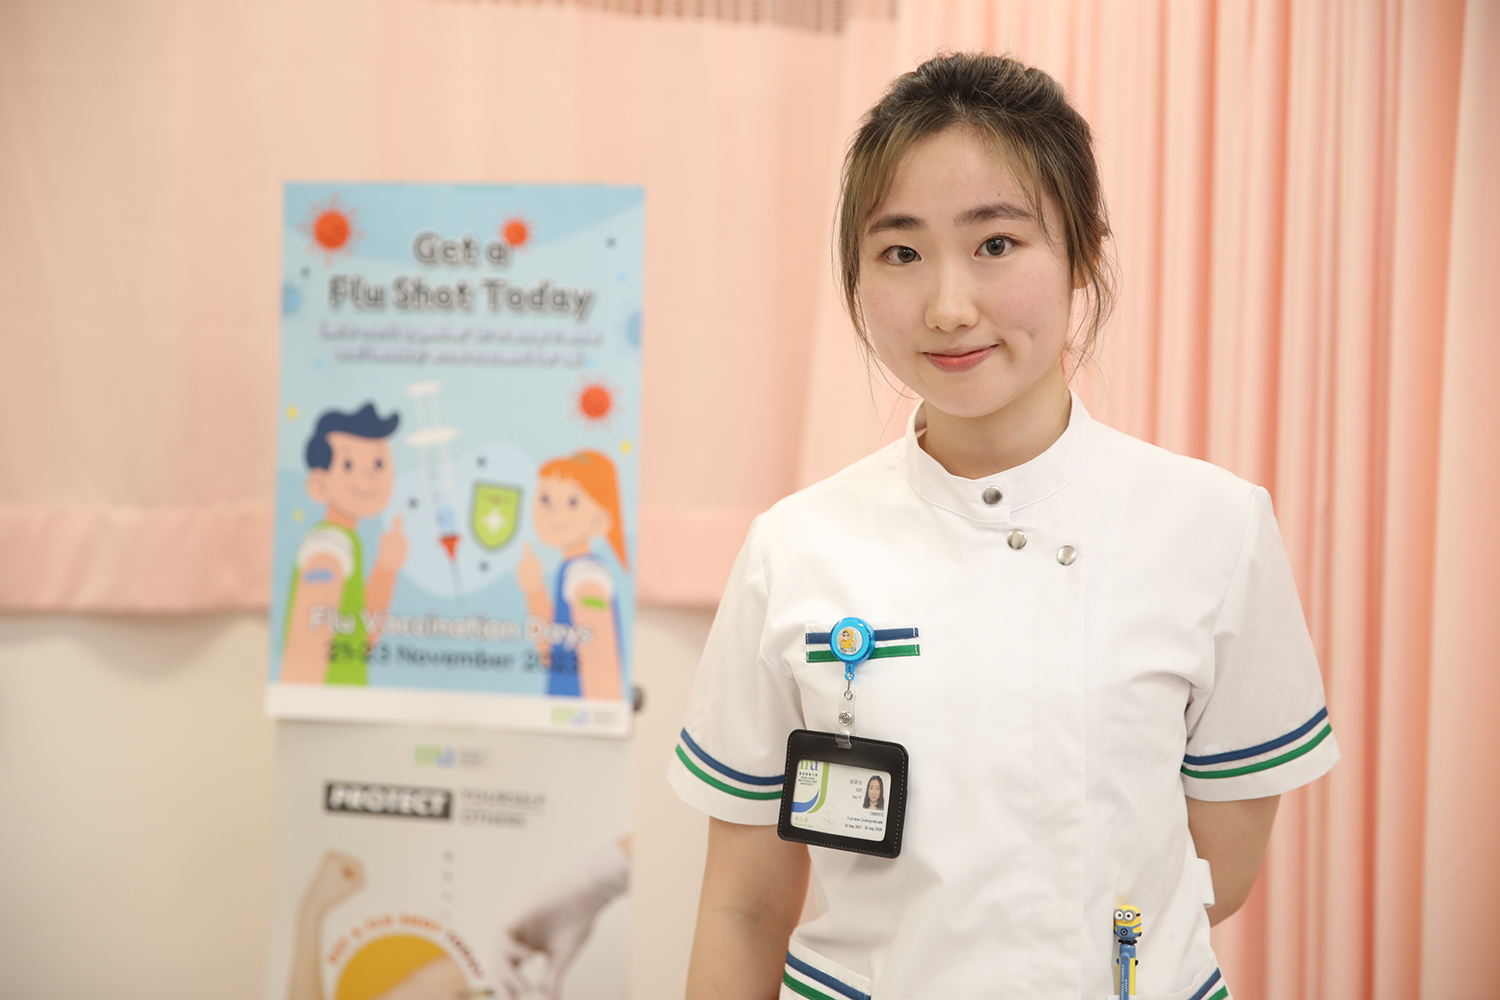 Sze Hoi-yi believes that the HKMU Vaccination Days helps raise the awareness of vaccination among teachers and students.